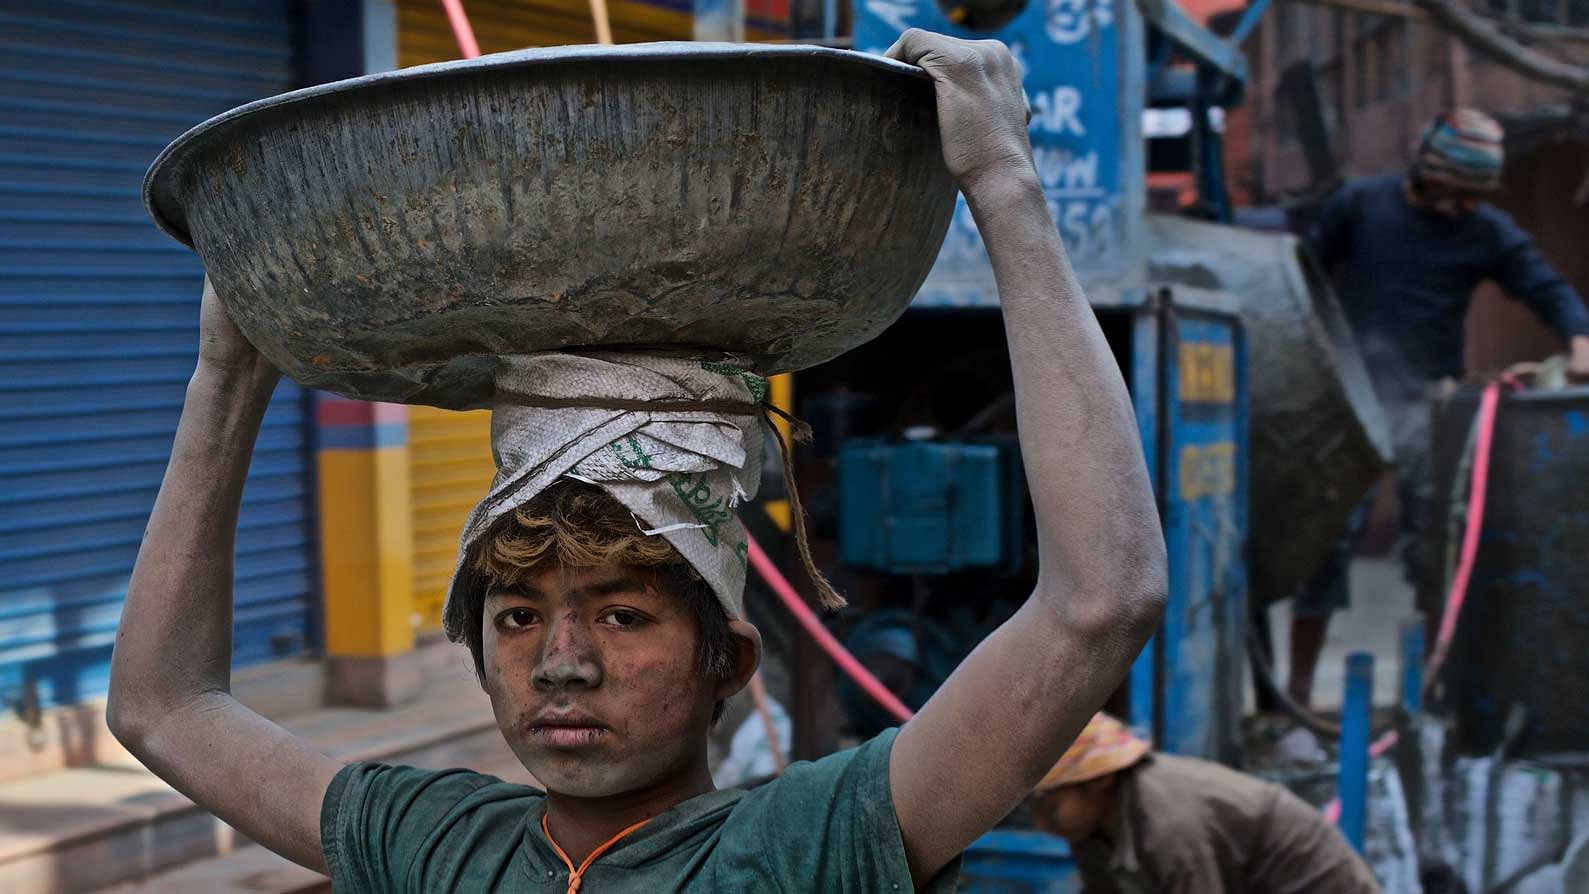 An amendment to the Child Labour Act was passed, which will allow children under 14 to help their parents with home-based work. Image used for representational purpose. (Photo: iStockphoto)